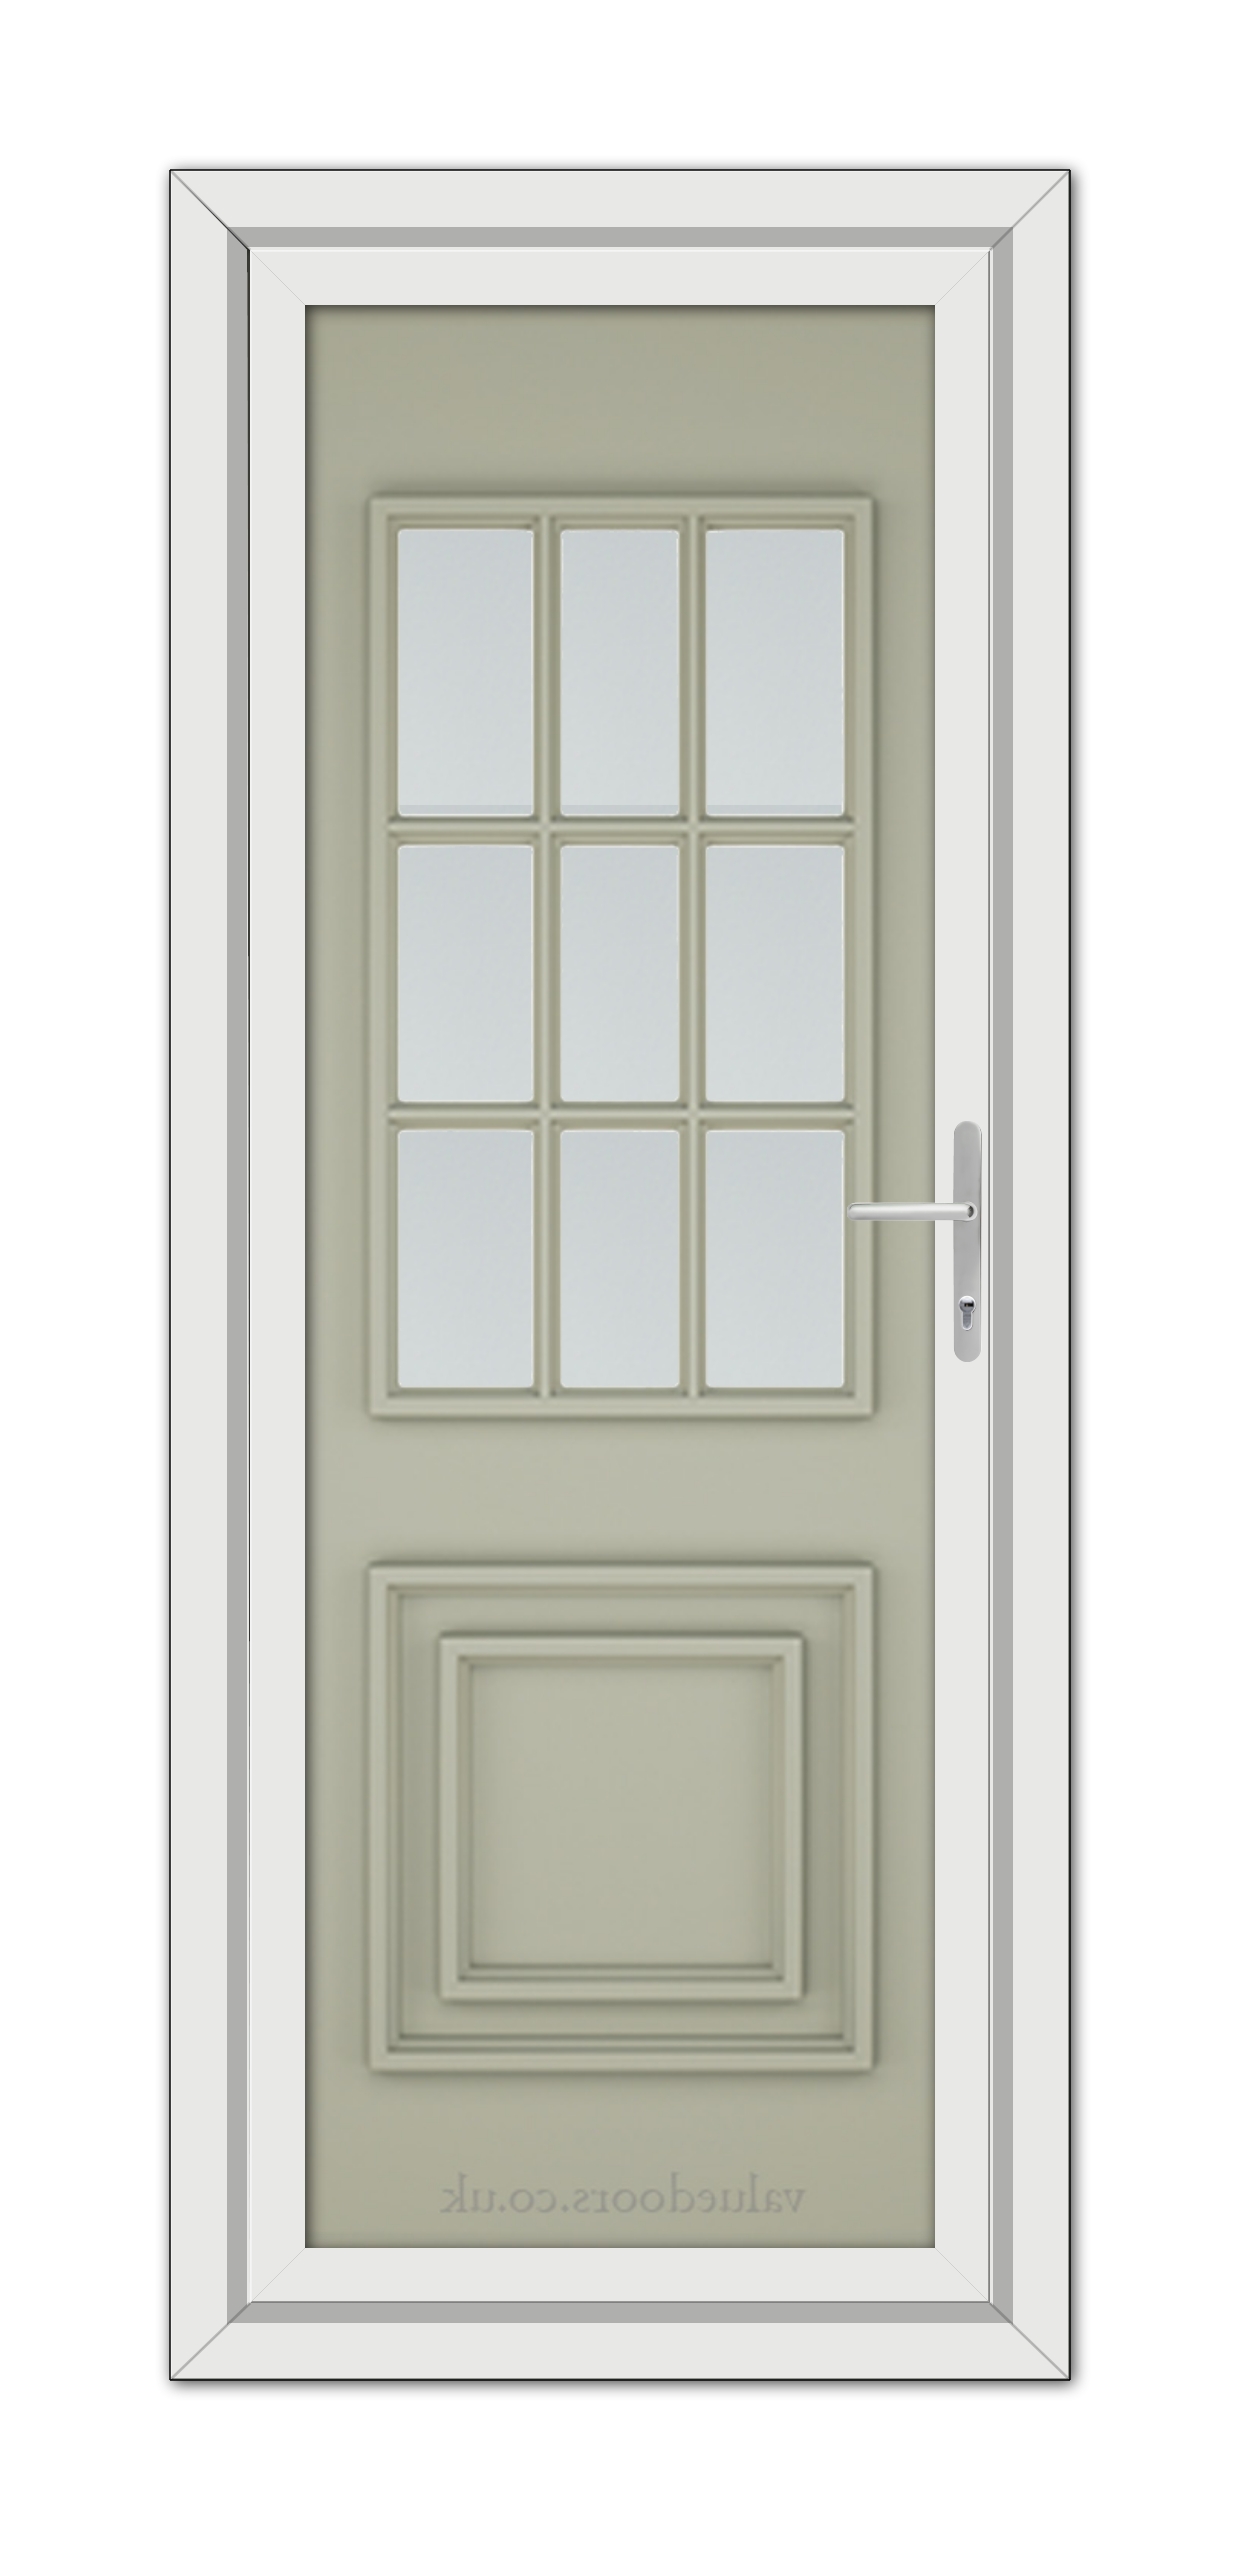 A modern Agate Grey Cambridge One uPVC Door in a pastel green color featuring a rectangular window with nine panes, set within a gray frame.